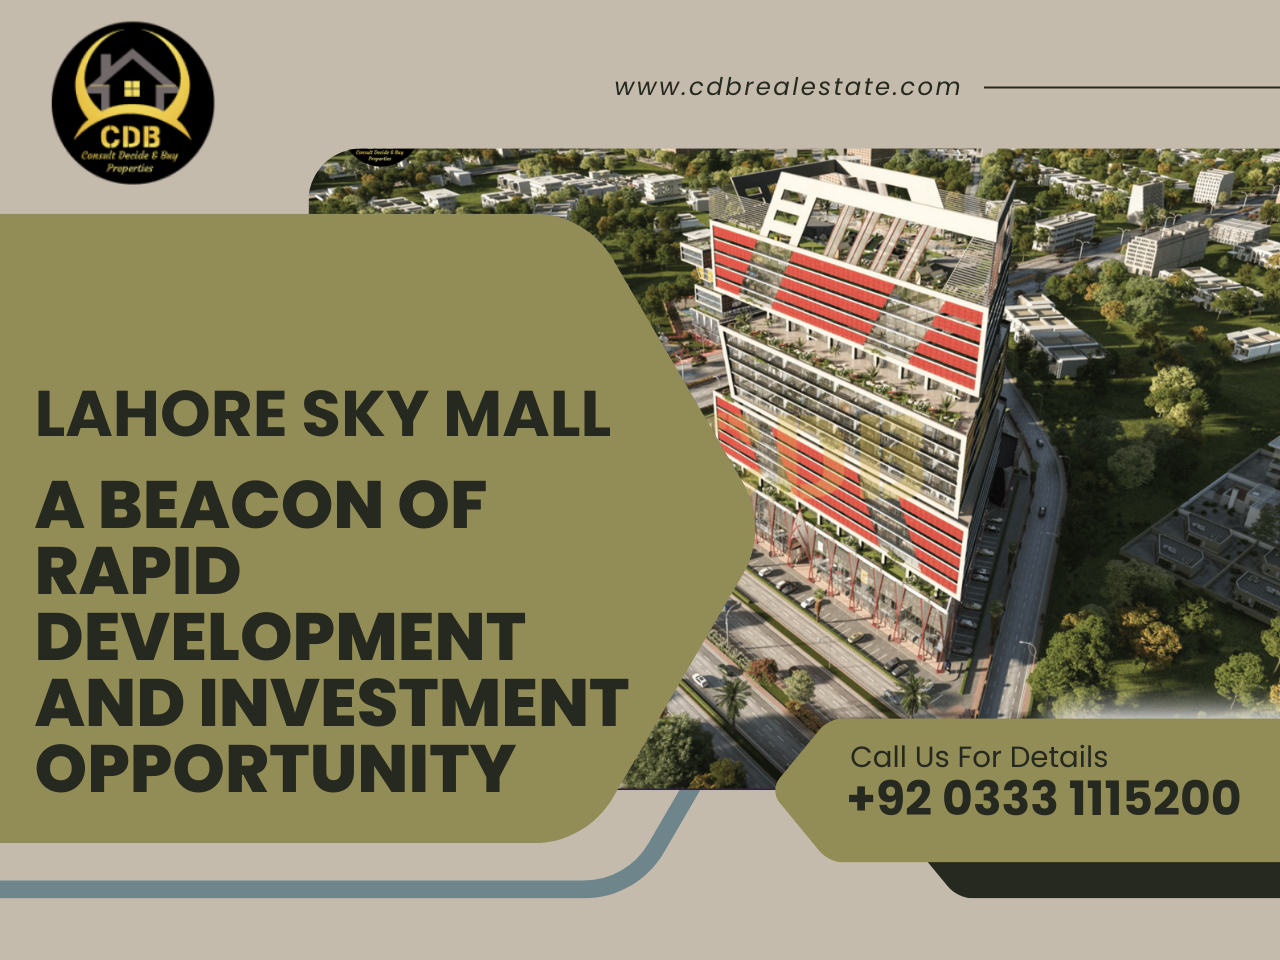 Lahore Sky Mall: A Beacon of Rapid Development and Investment Opportunity